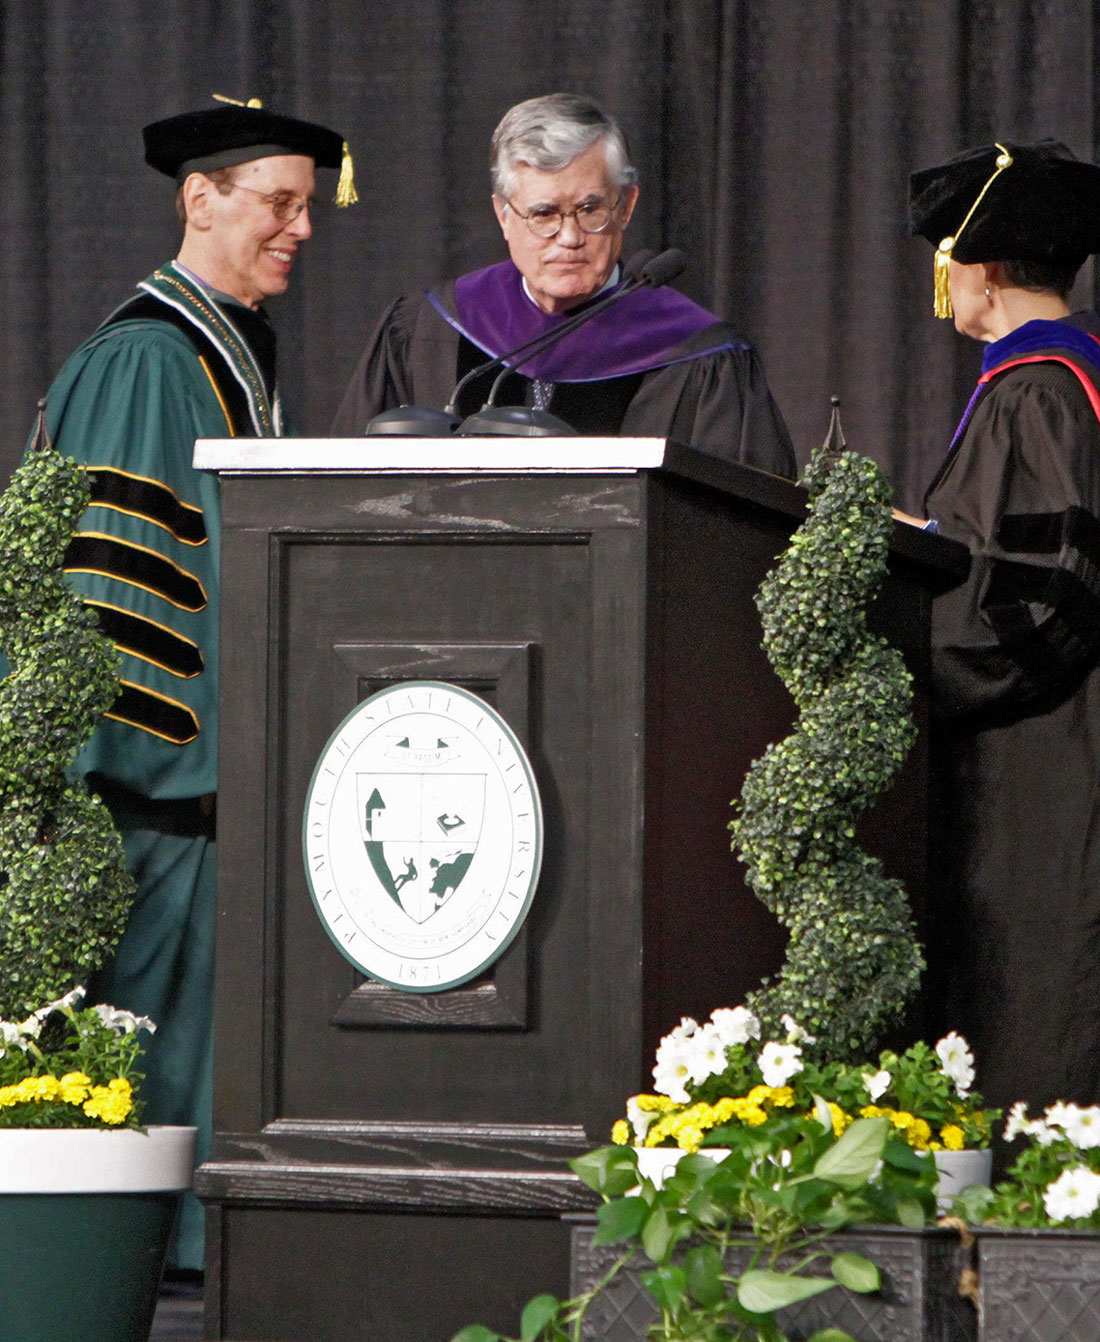 Professors standing at the commencement podium